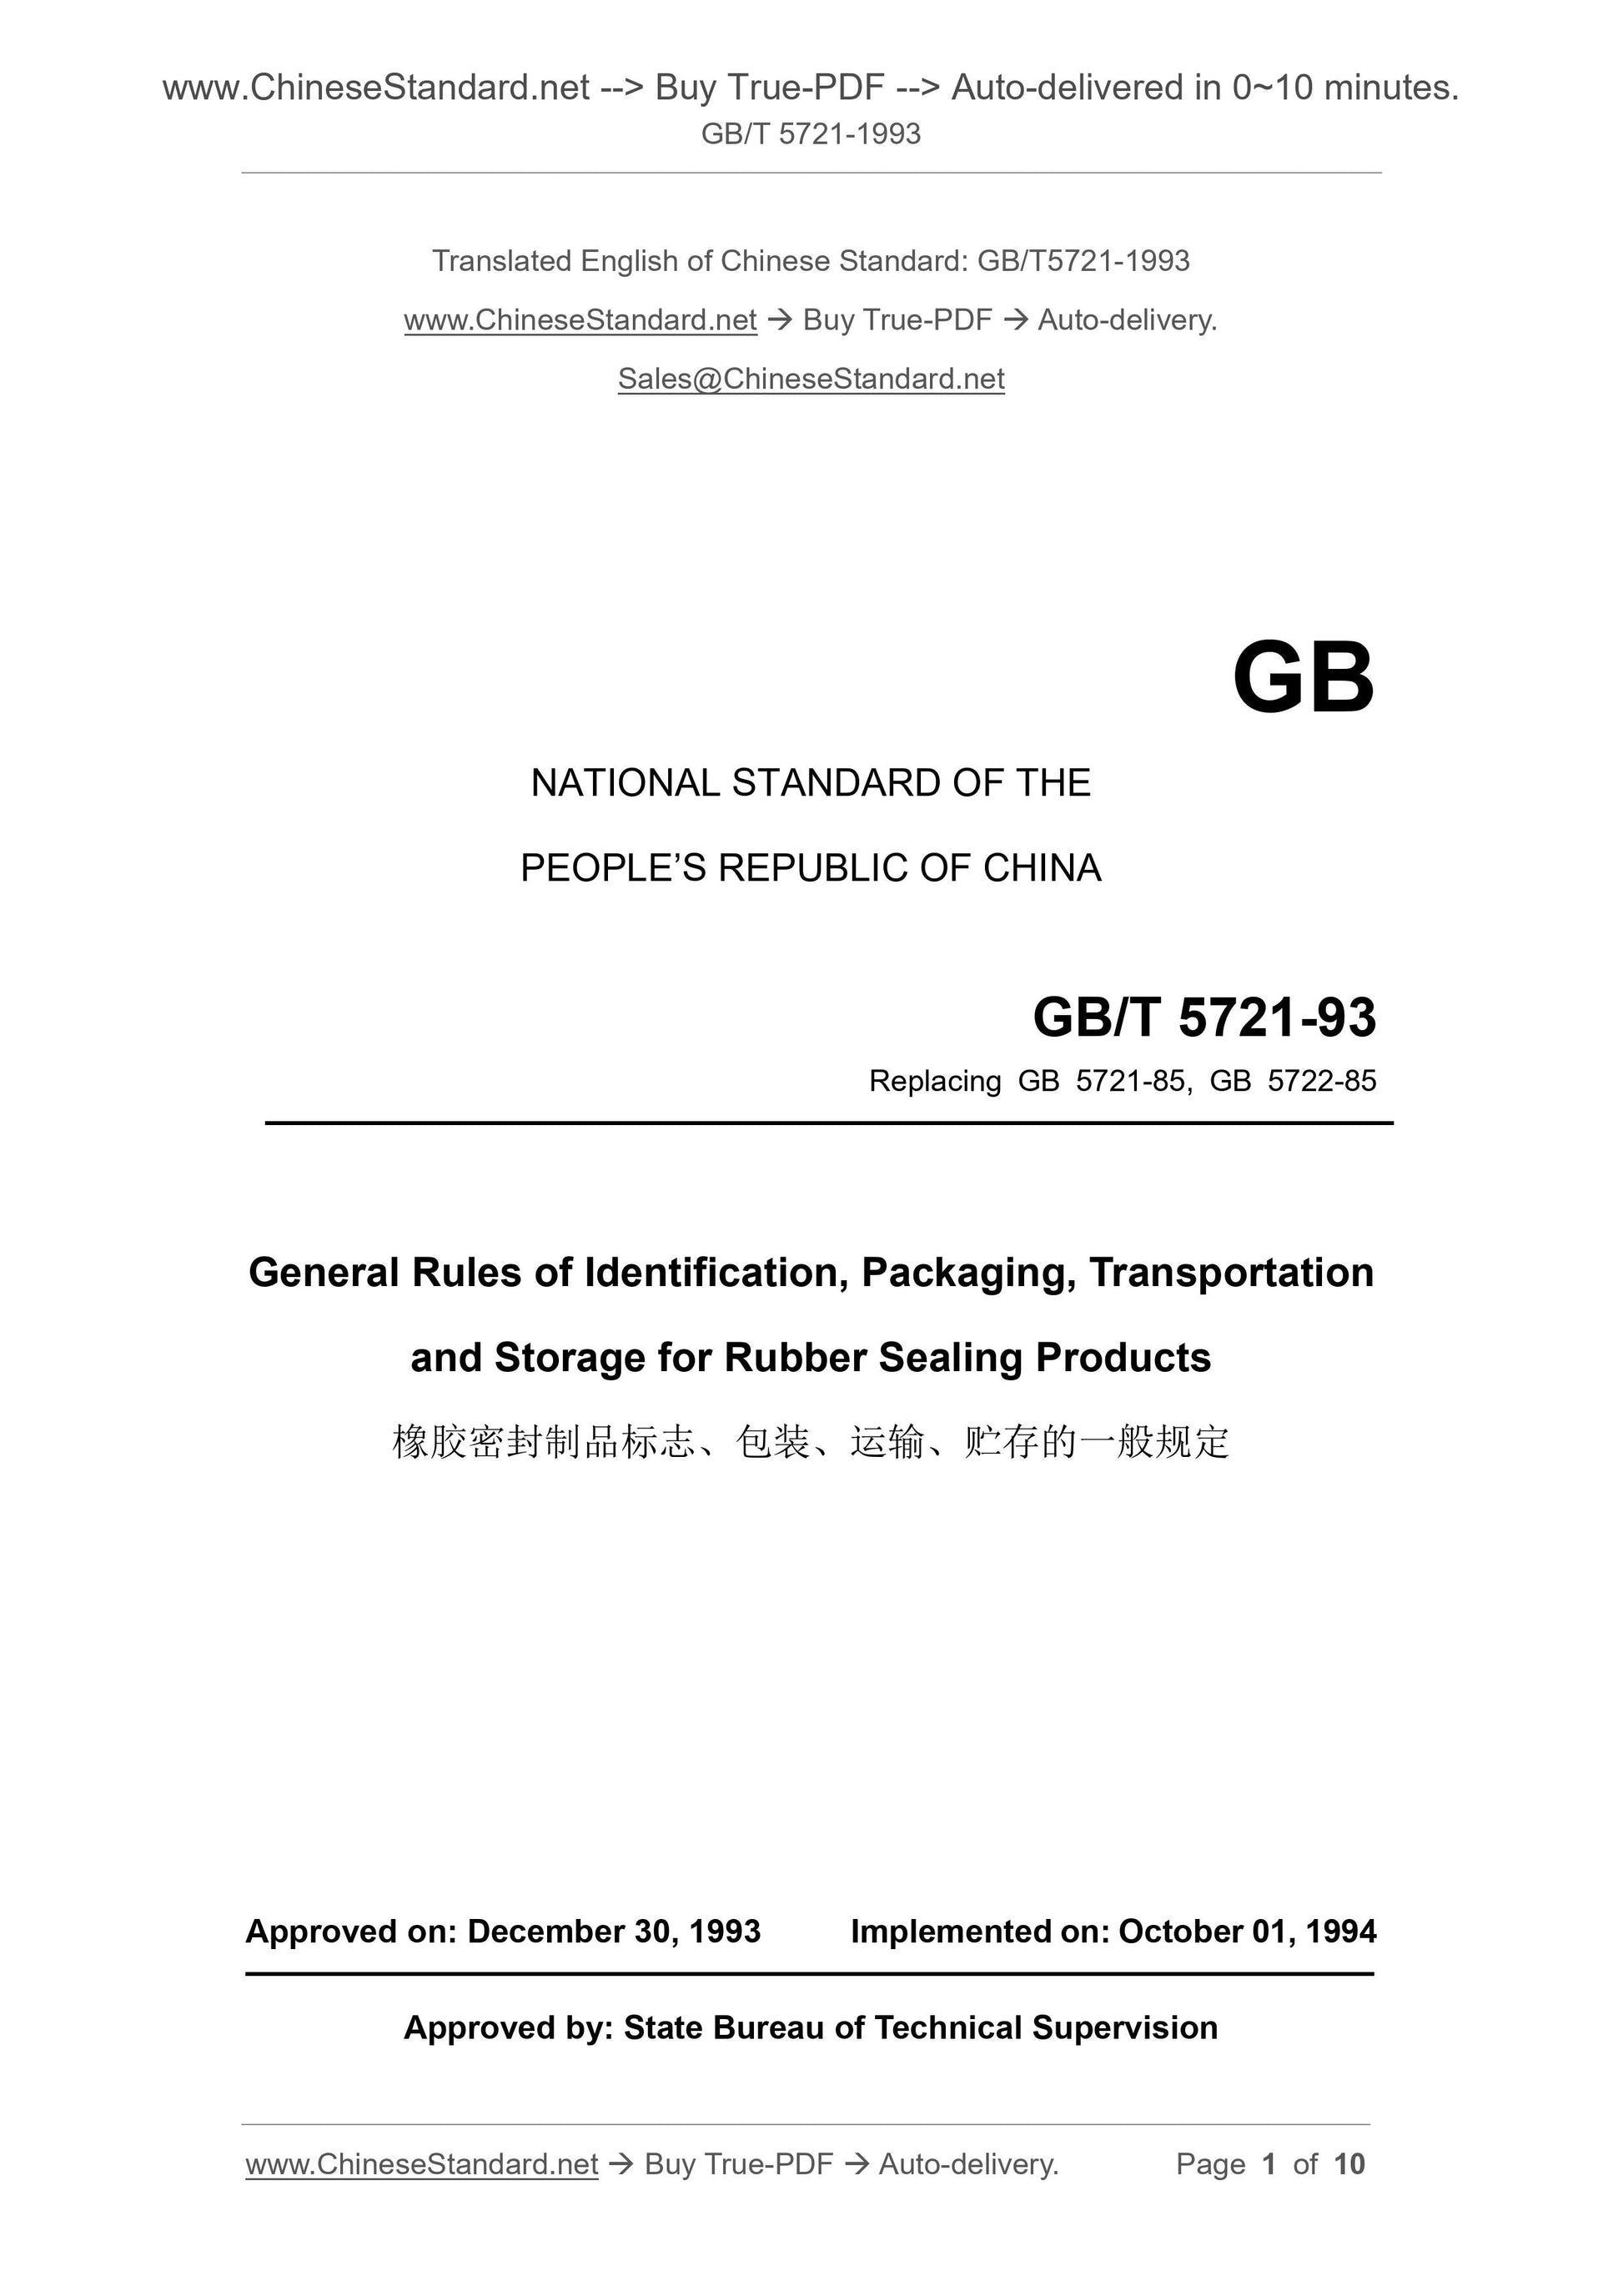 GB/T 5721-1993 Page 1